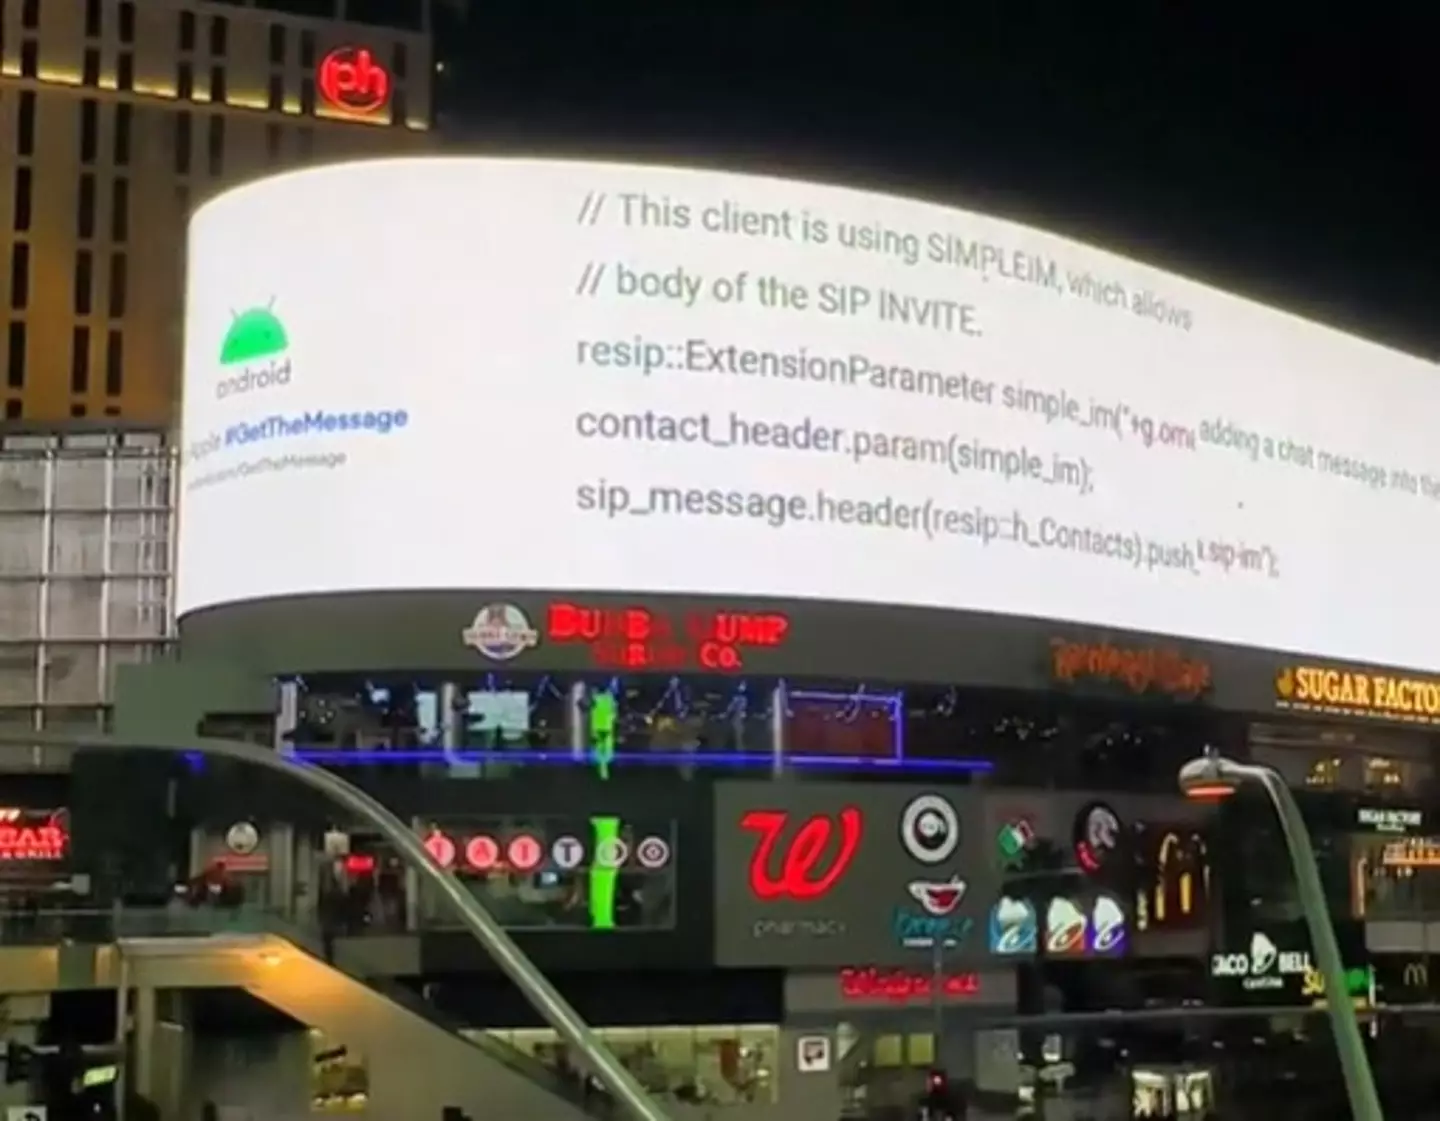 Google ended up sticking the advert on a giant billboard for everyone to see.